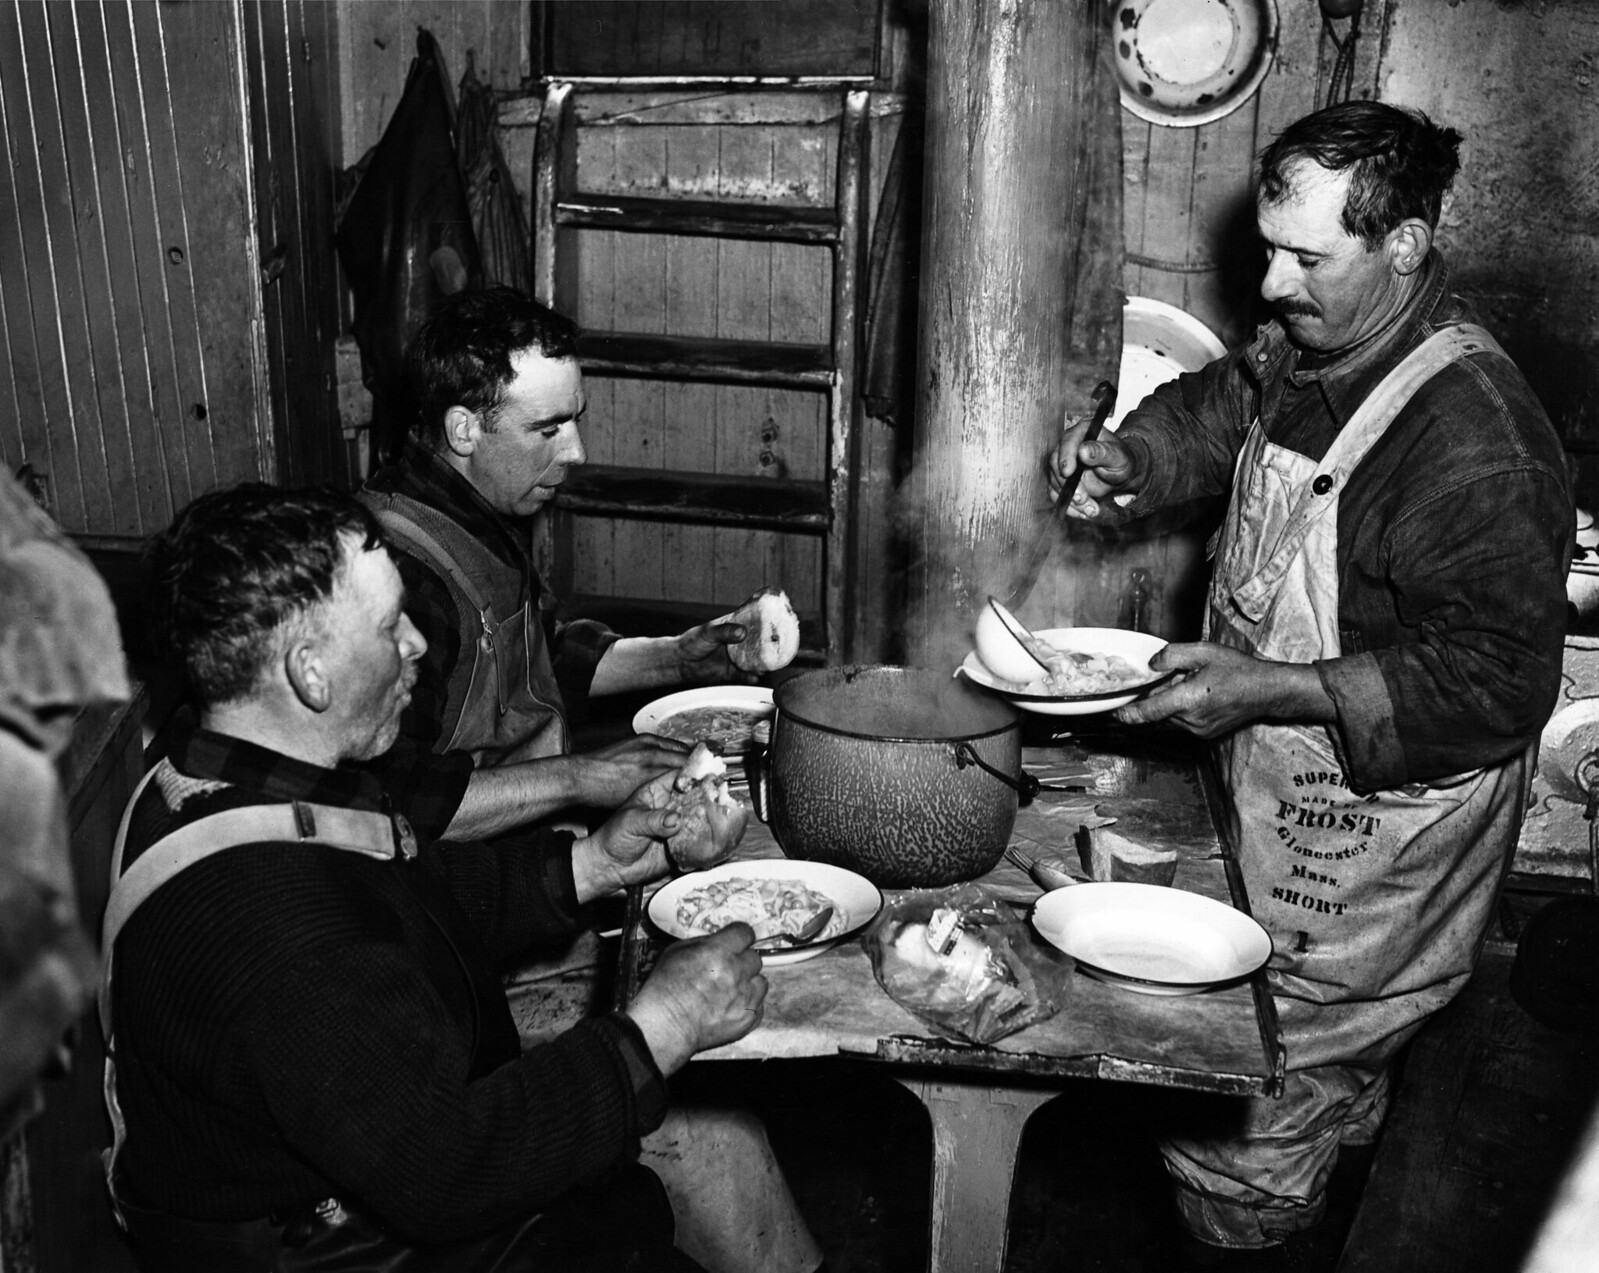 Dinner aboard the Frances and Marion, a Portuguese drag trawler